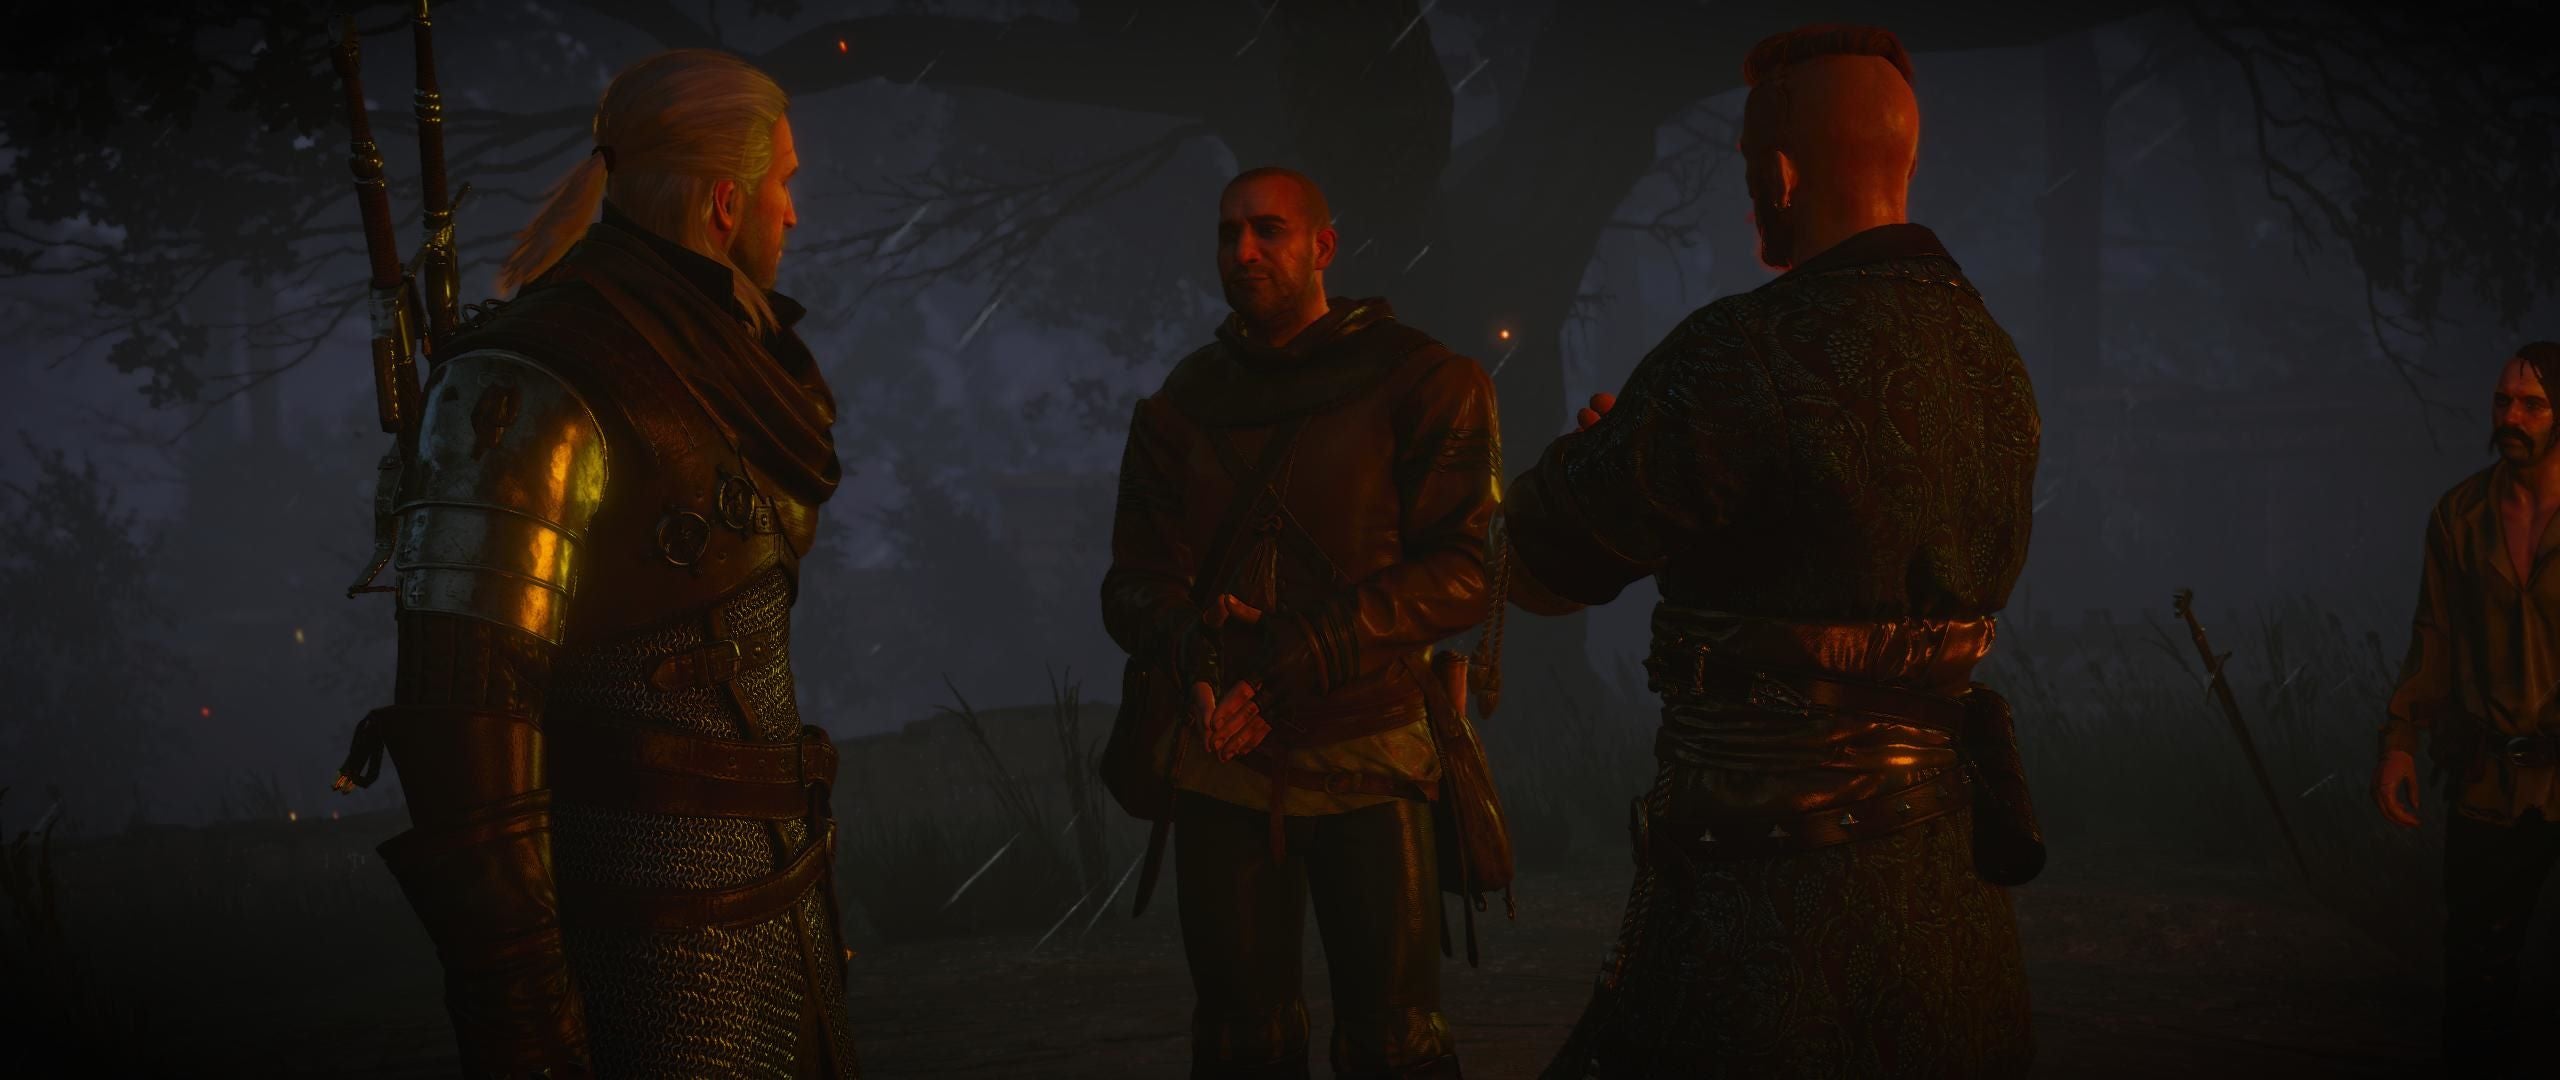 The Witcher 3 Super mod brings much sharper lighting to an already stunning |